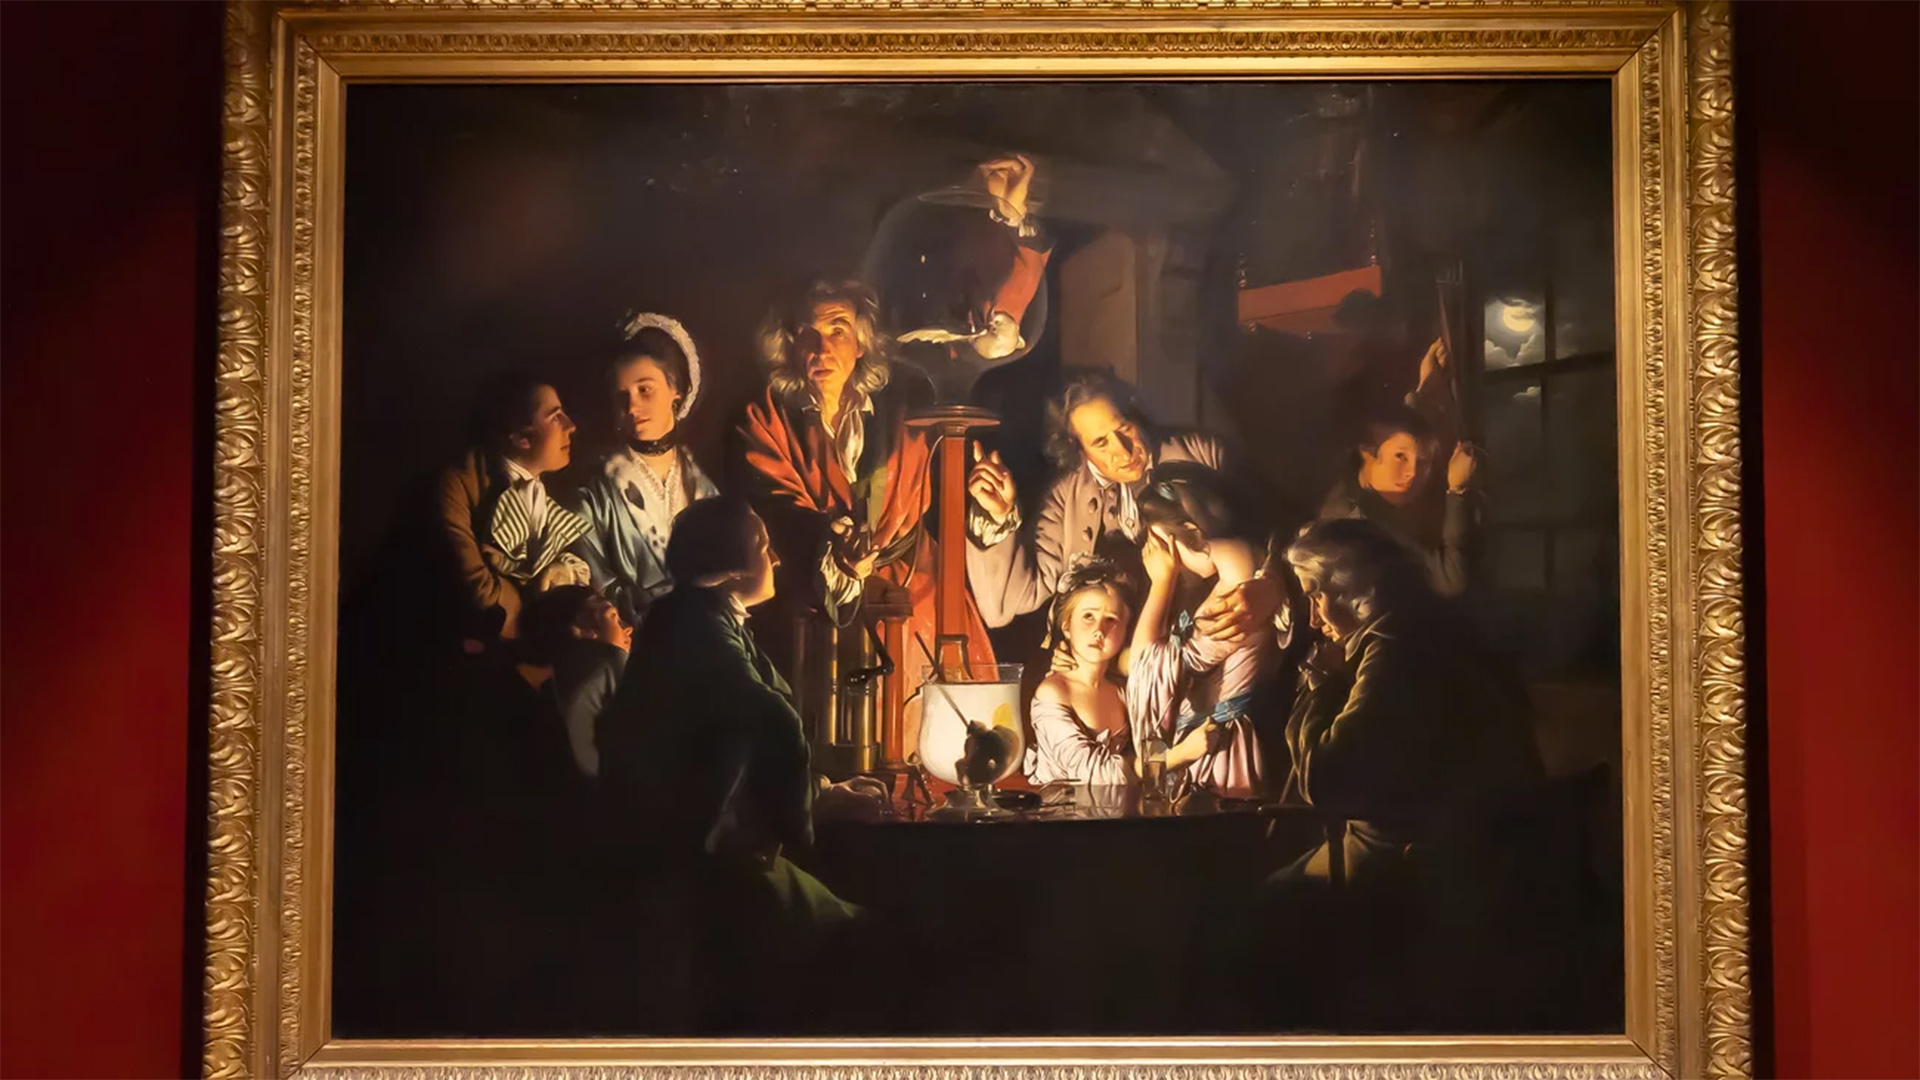 Installation view of Joseph Wright of Derby's An Experiment on a Bird in the Air Pump, in "Science and the Sublime: A Masterpiece by Joseph Wright of Derby."